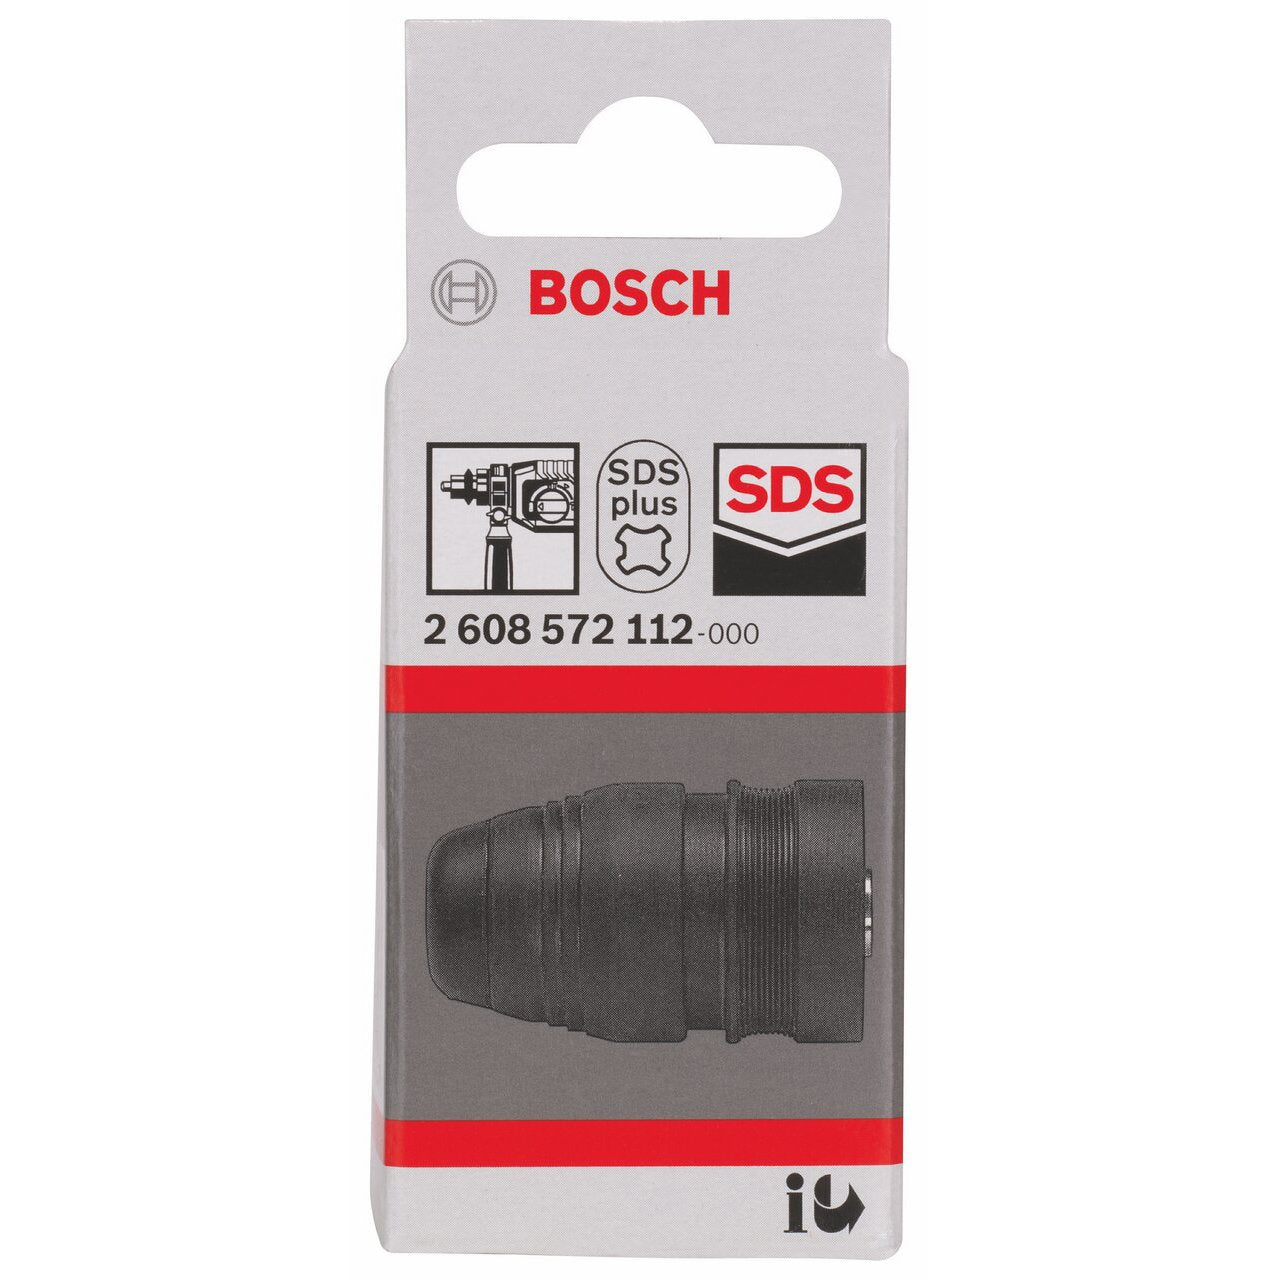 SDS Plus Quick Change Chuck suit Rotary Hammer Drills 2608572112 by Bosch